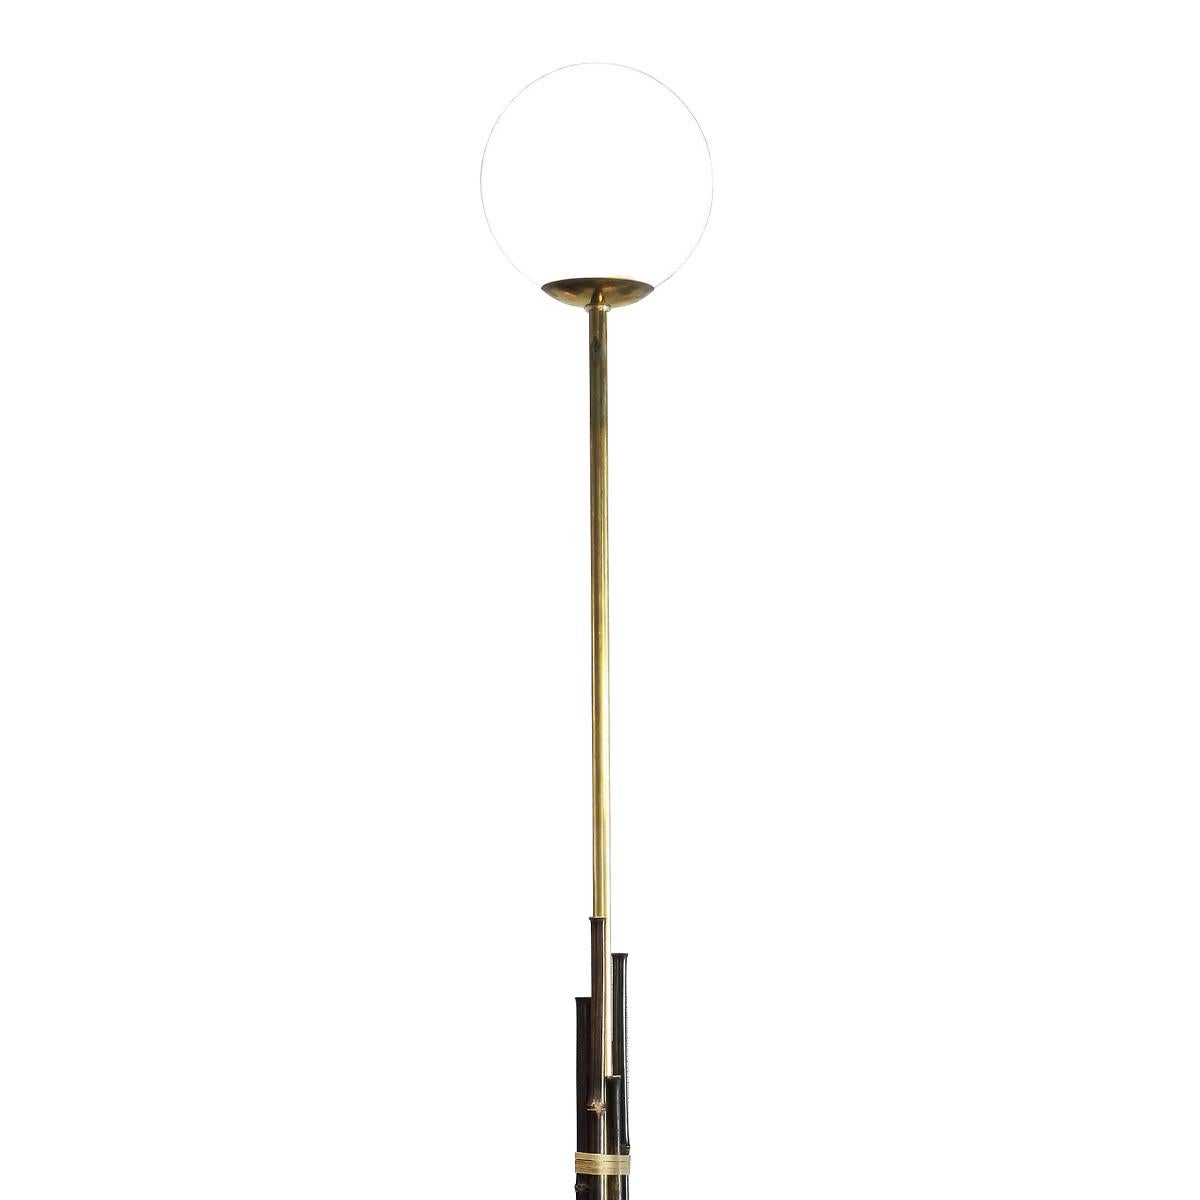 Floor lamp bamboos high with black bamboo,
with solid painted brass rod with opal glass shade.
Wiring 14W bulb, 220Volt and switch included, lamp
holder type E27, bulb not included. On casted iron, 
Measure: base, 30cm diameter.
Available in